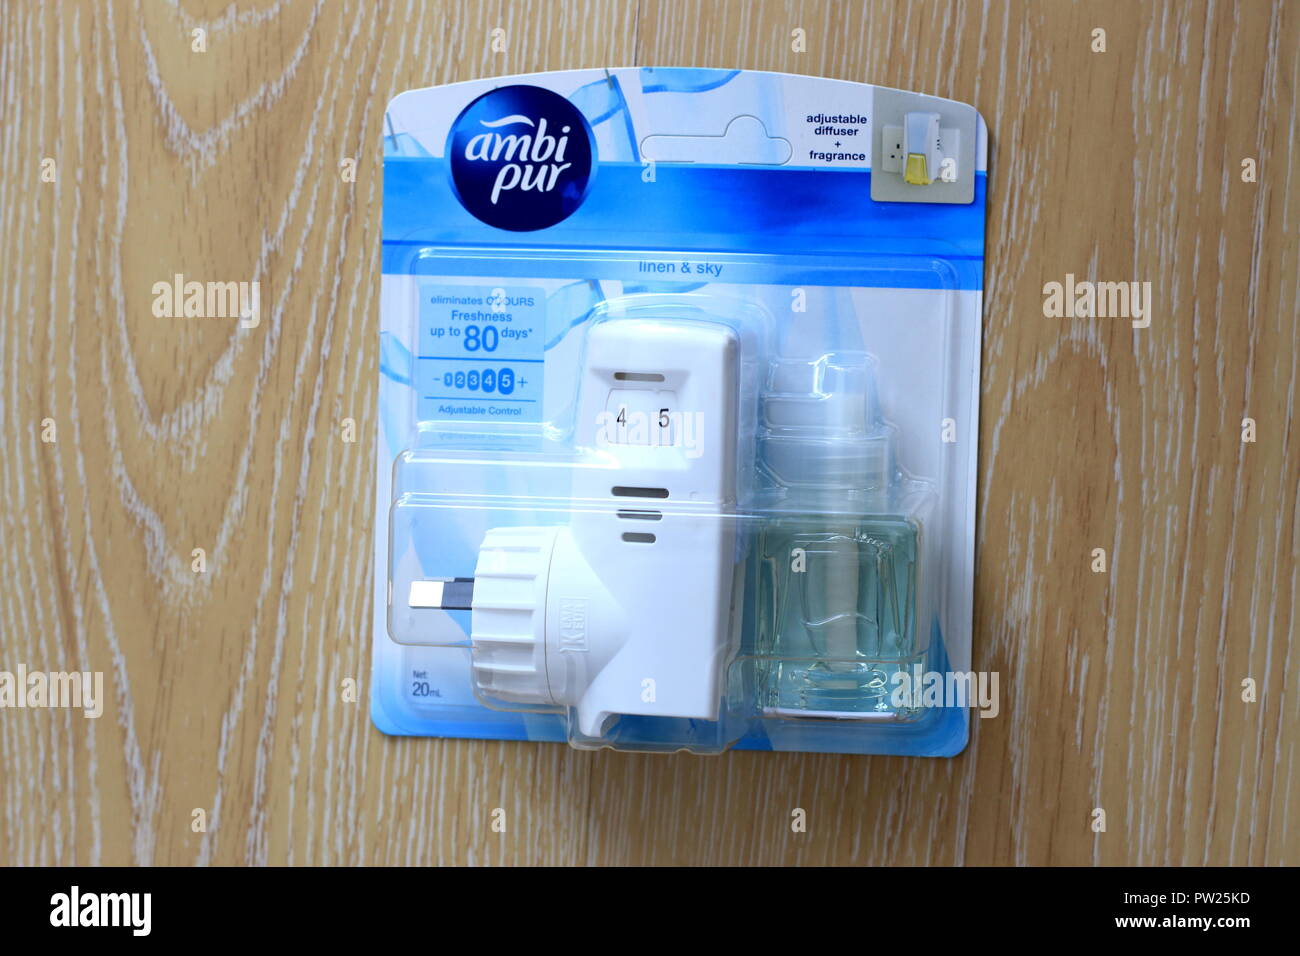 NOT AN ACTUAL PRODUCT - Plug in Ambi Pur Vanilla Harmony Air Freshener - isolated Stock Photo